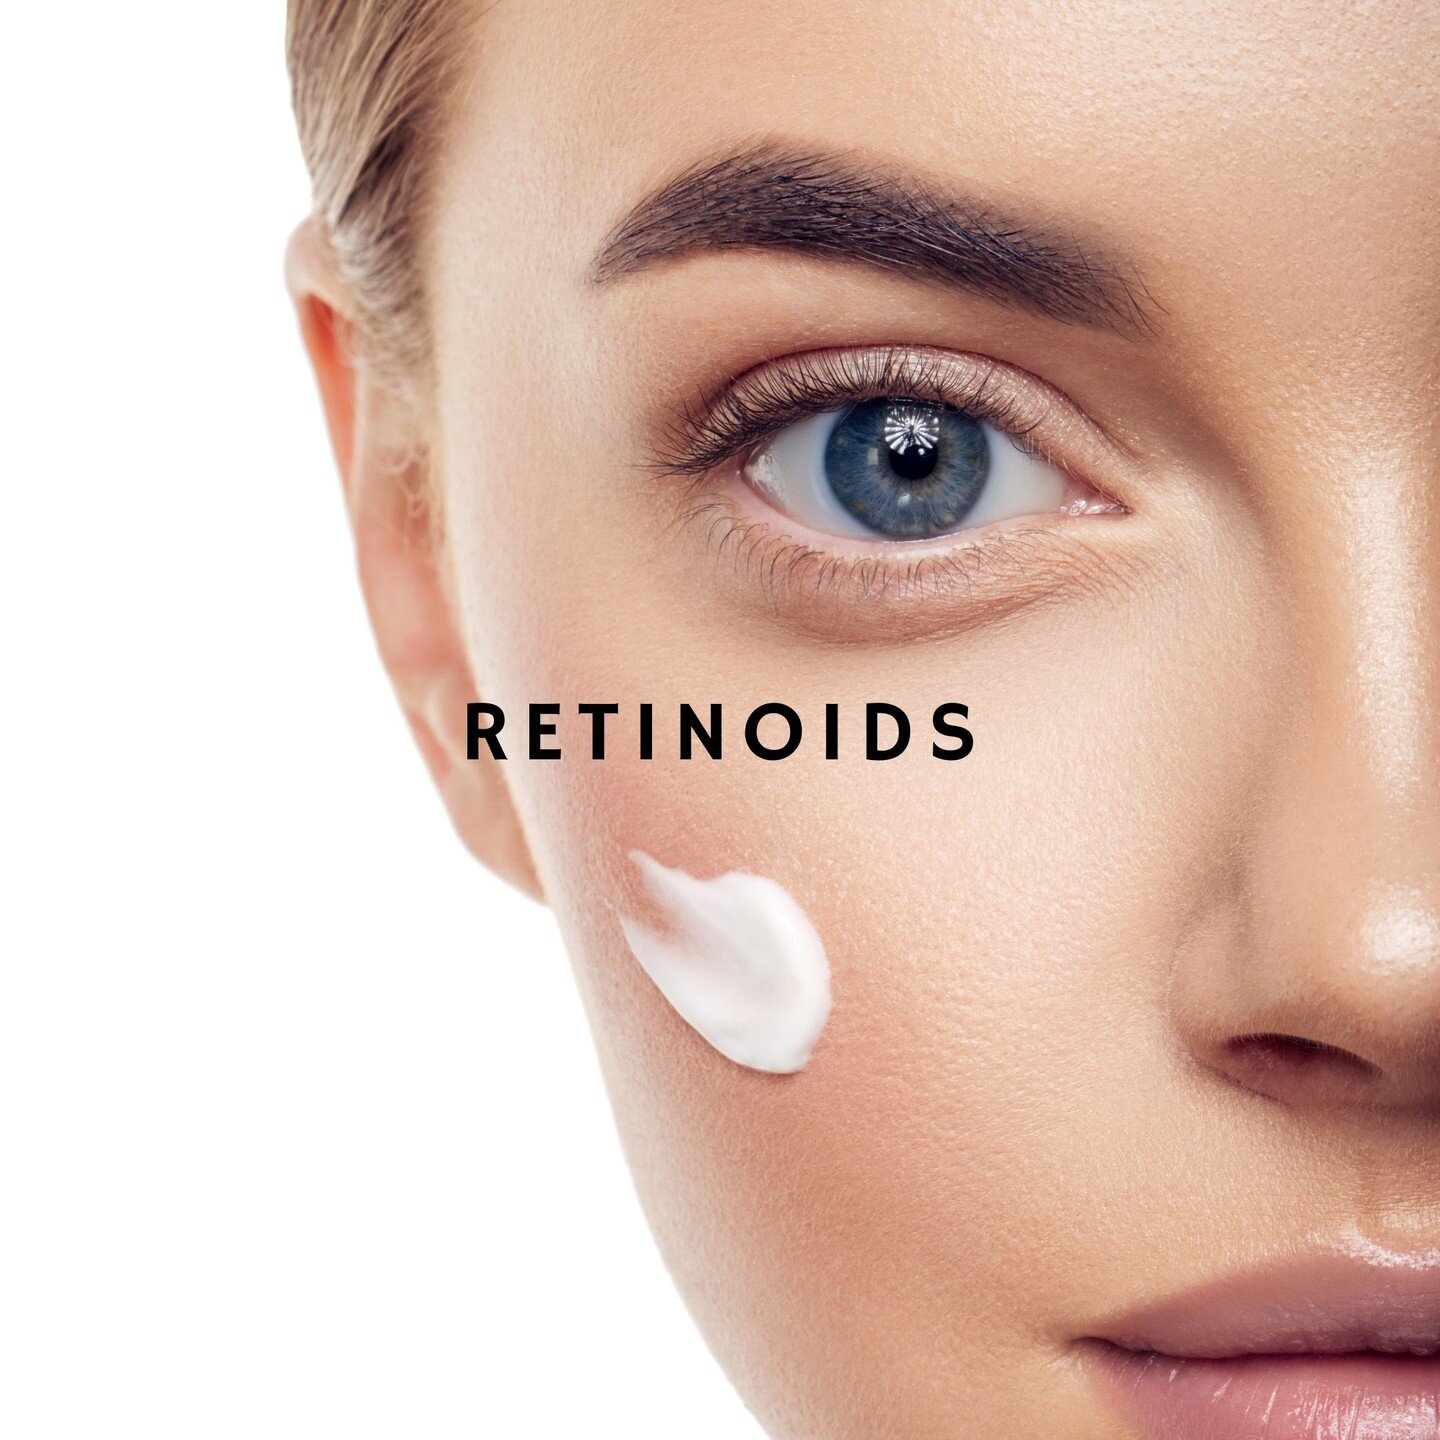 Retinoids are premier evidence-based cosmeceuticals, as they function through surface cell receptor interaction to produce a clinically defined effect. They consist of natural and synthetic derivatives of vitamin A that reduce hyperpigmentation and i